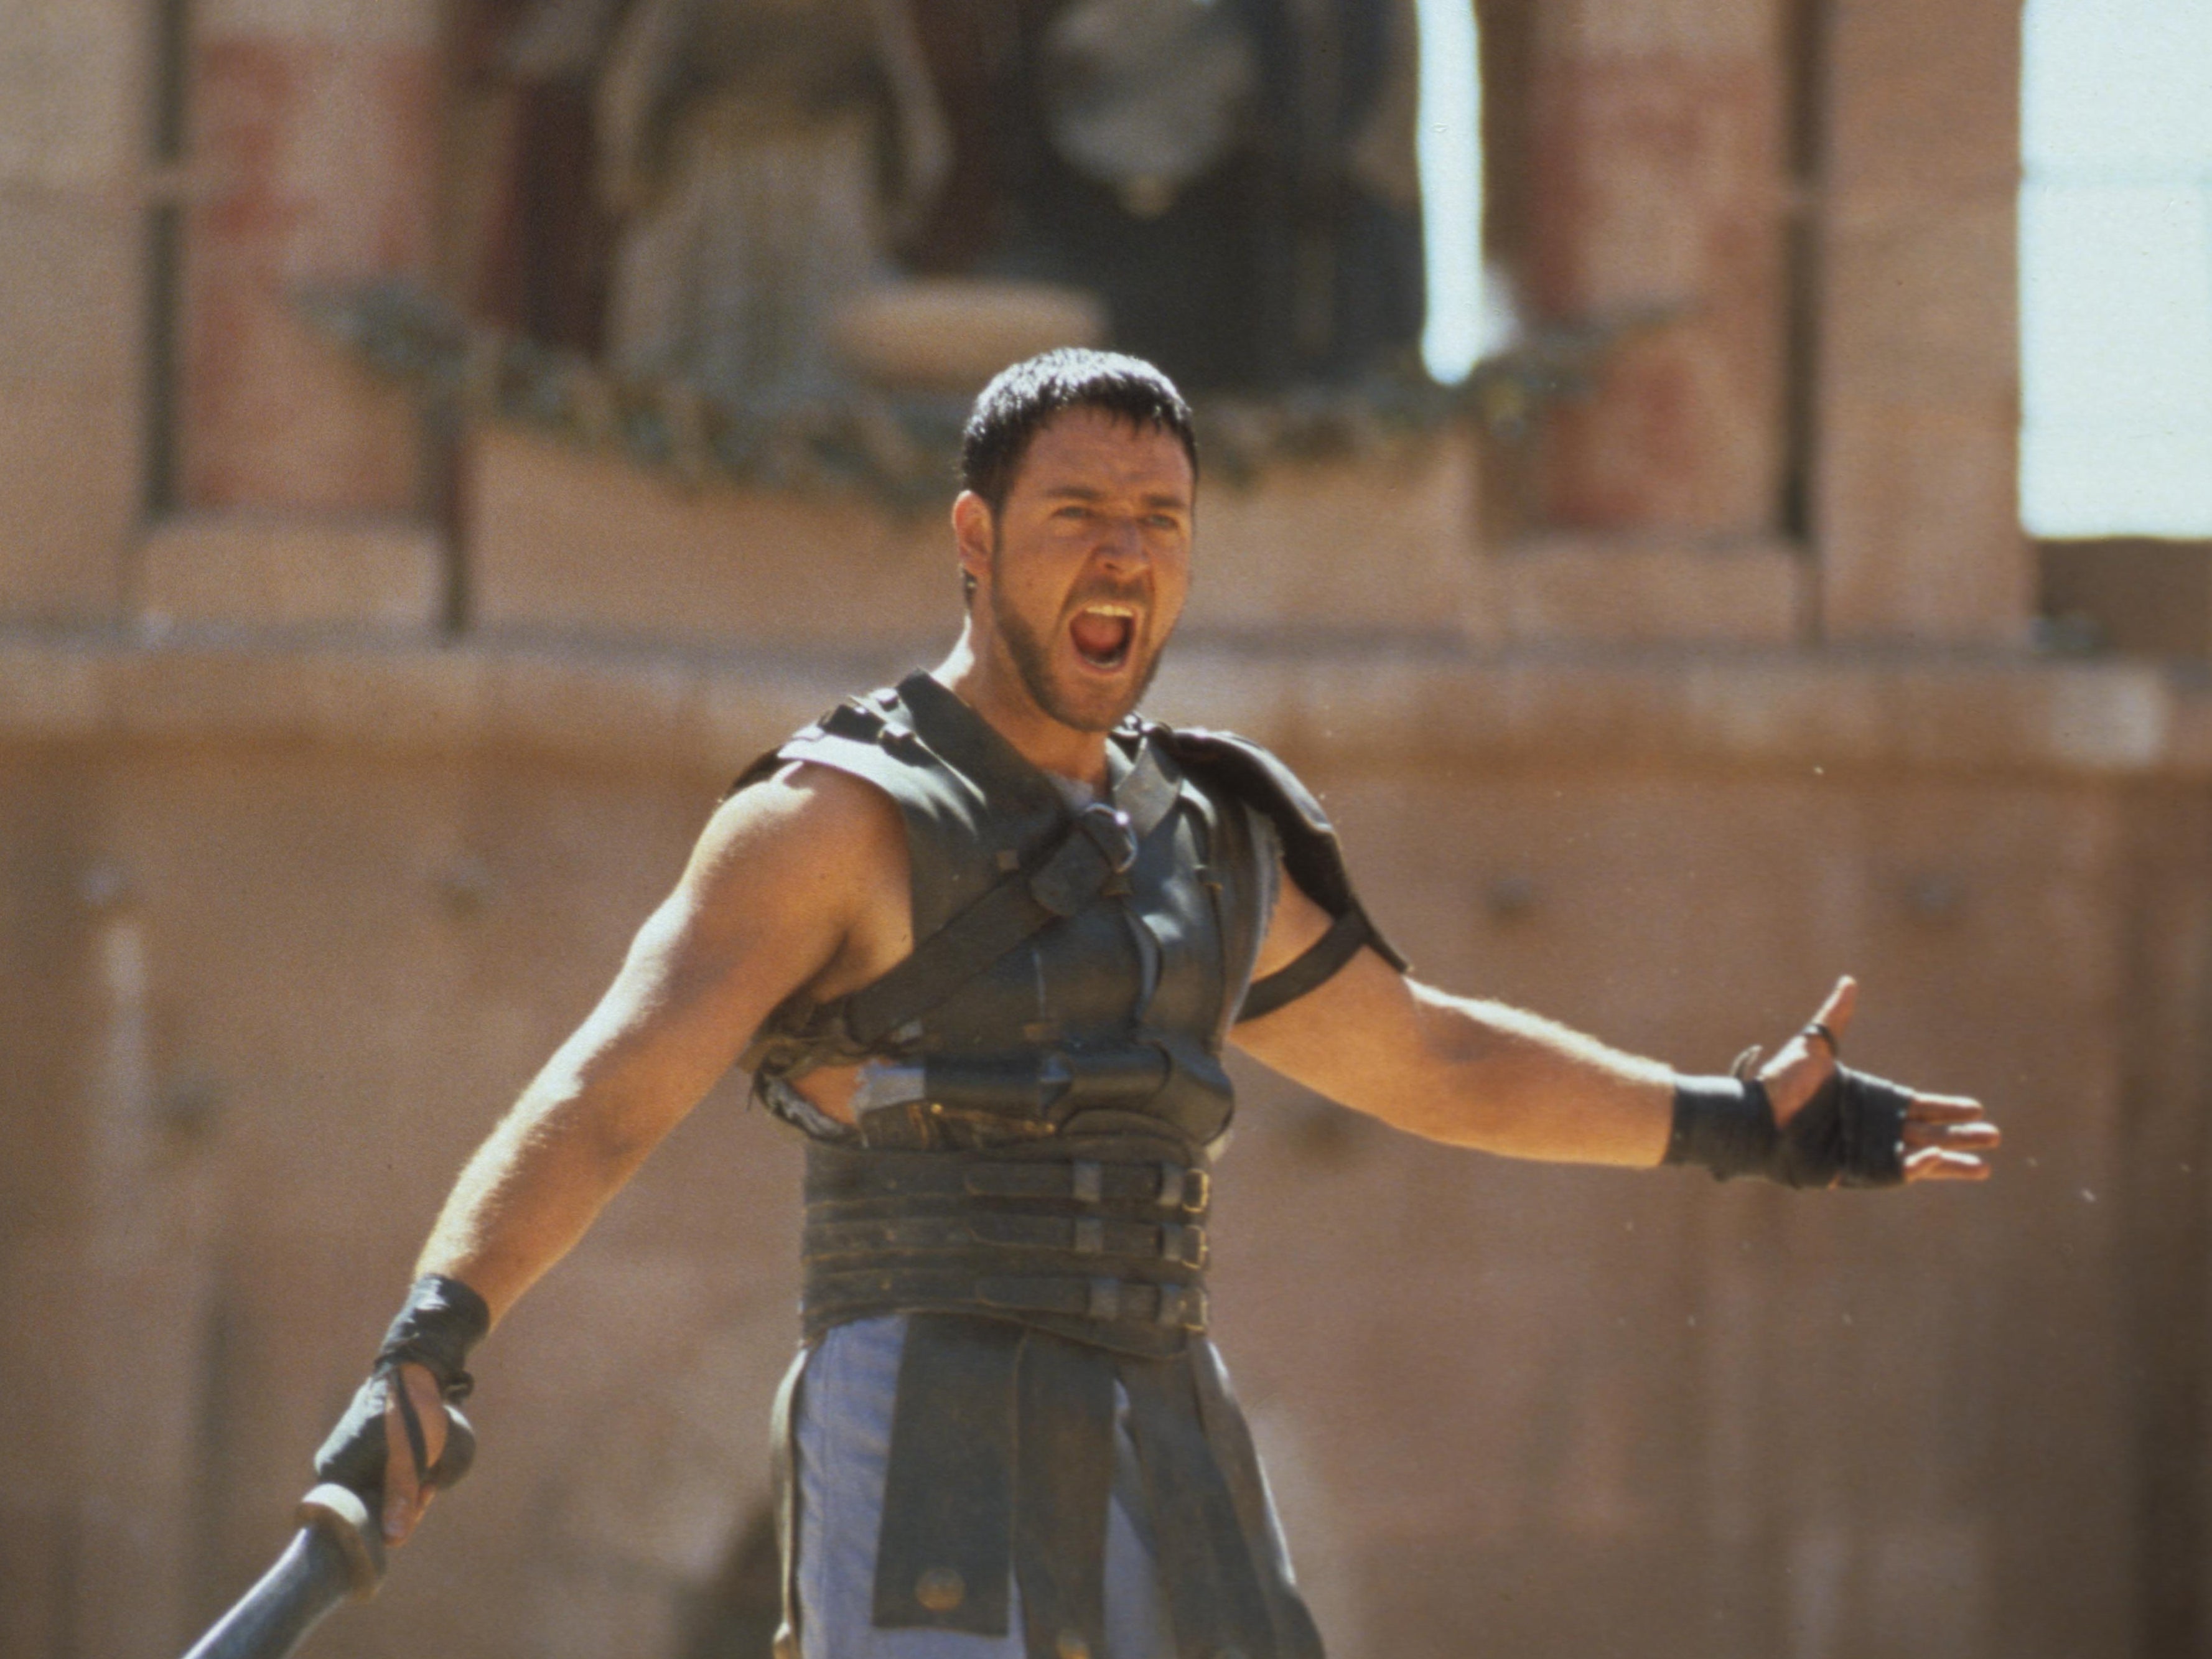 Russell Crowe in ‘Gladiator’ (2000)